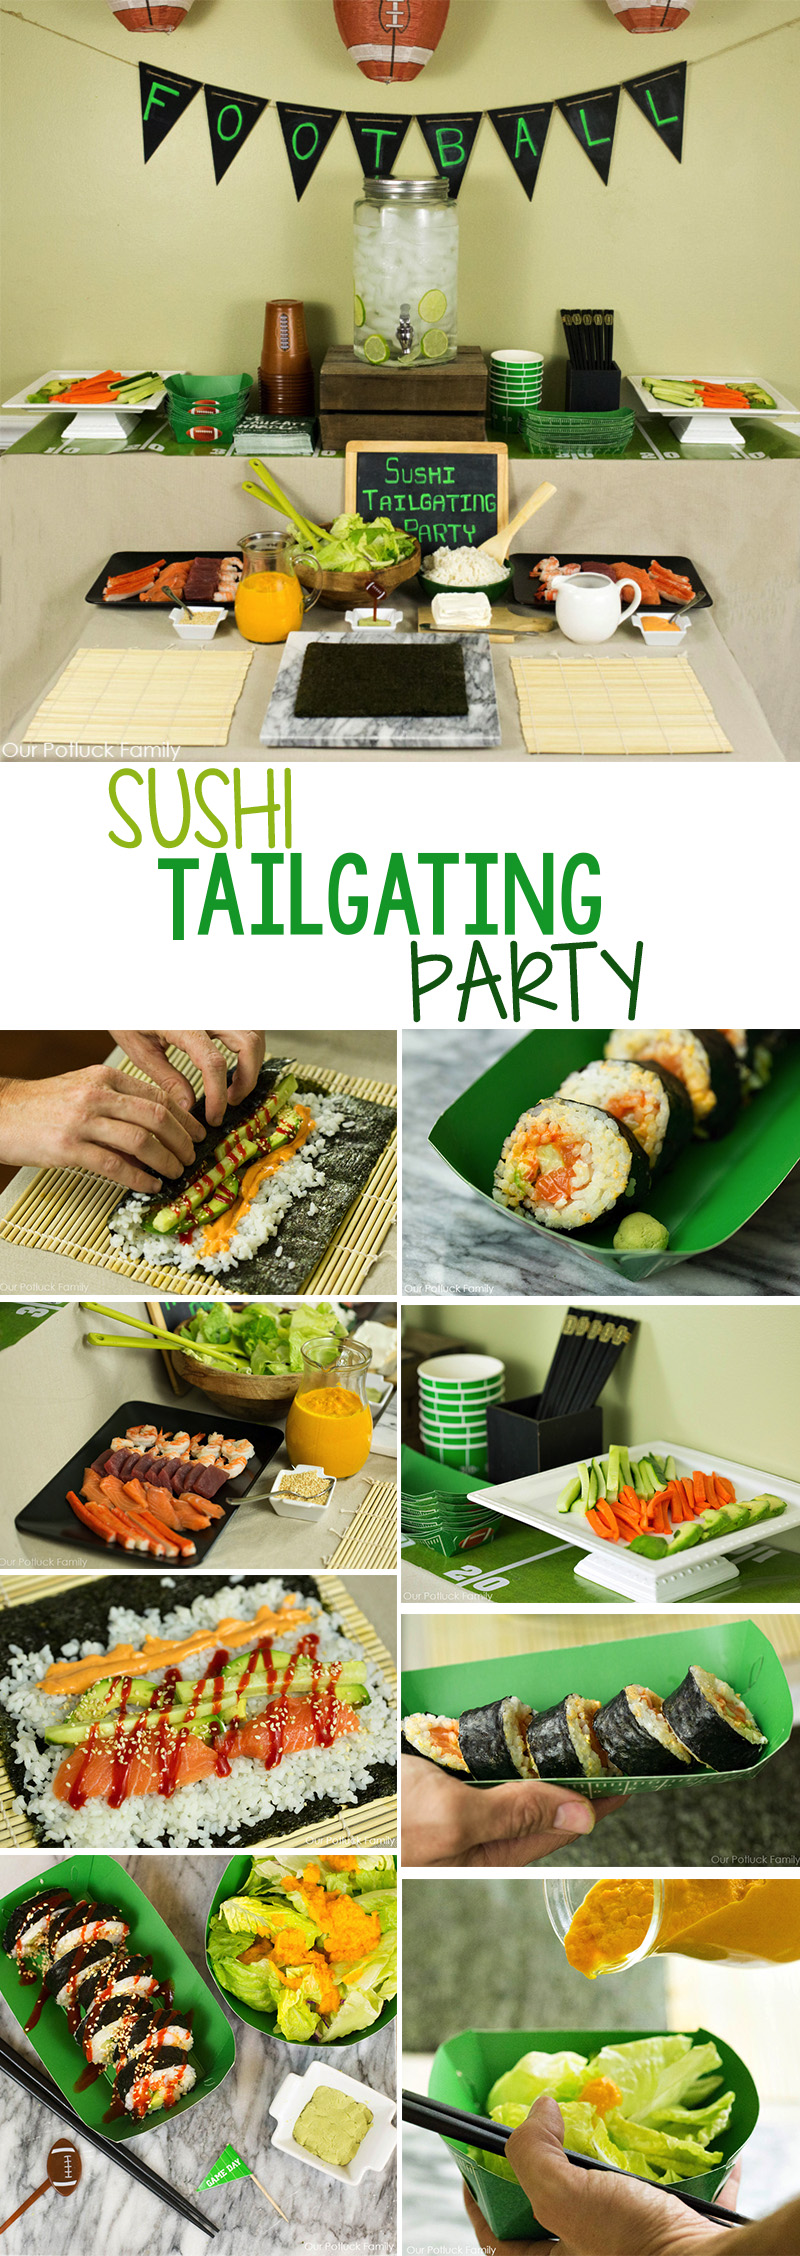 sushi-tailgating-party